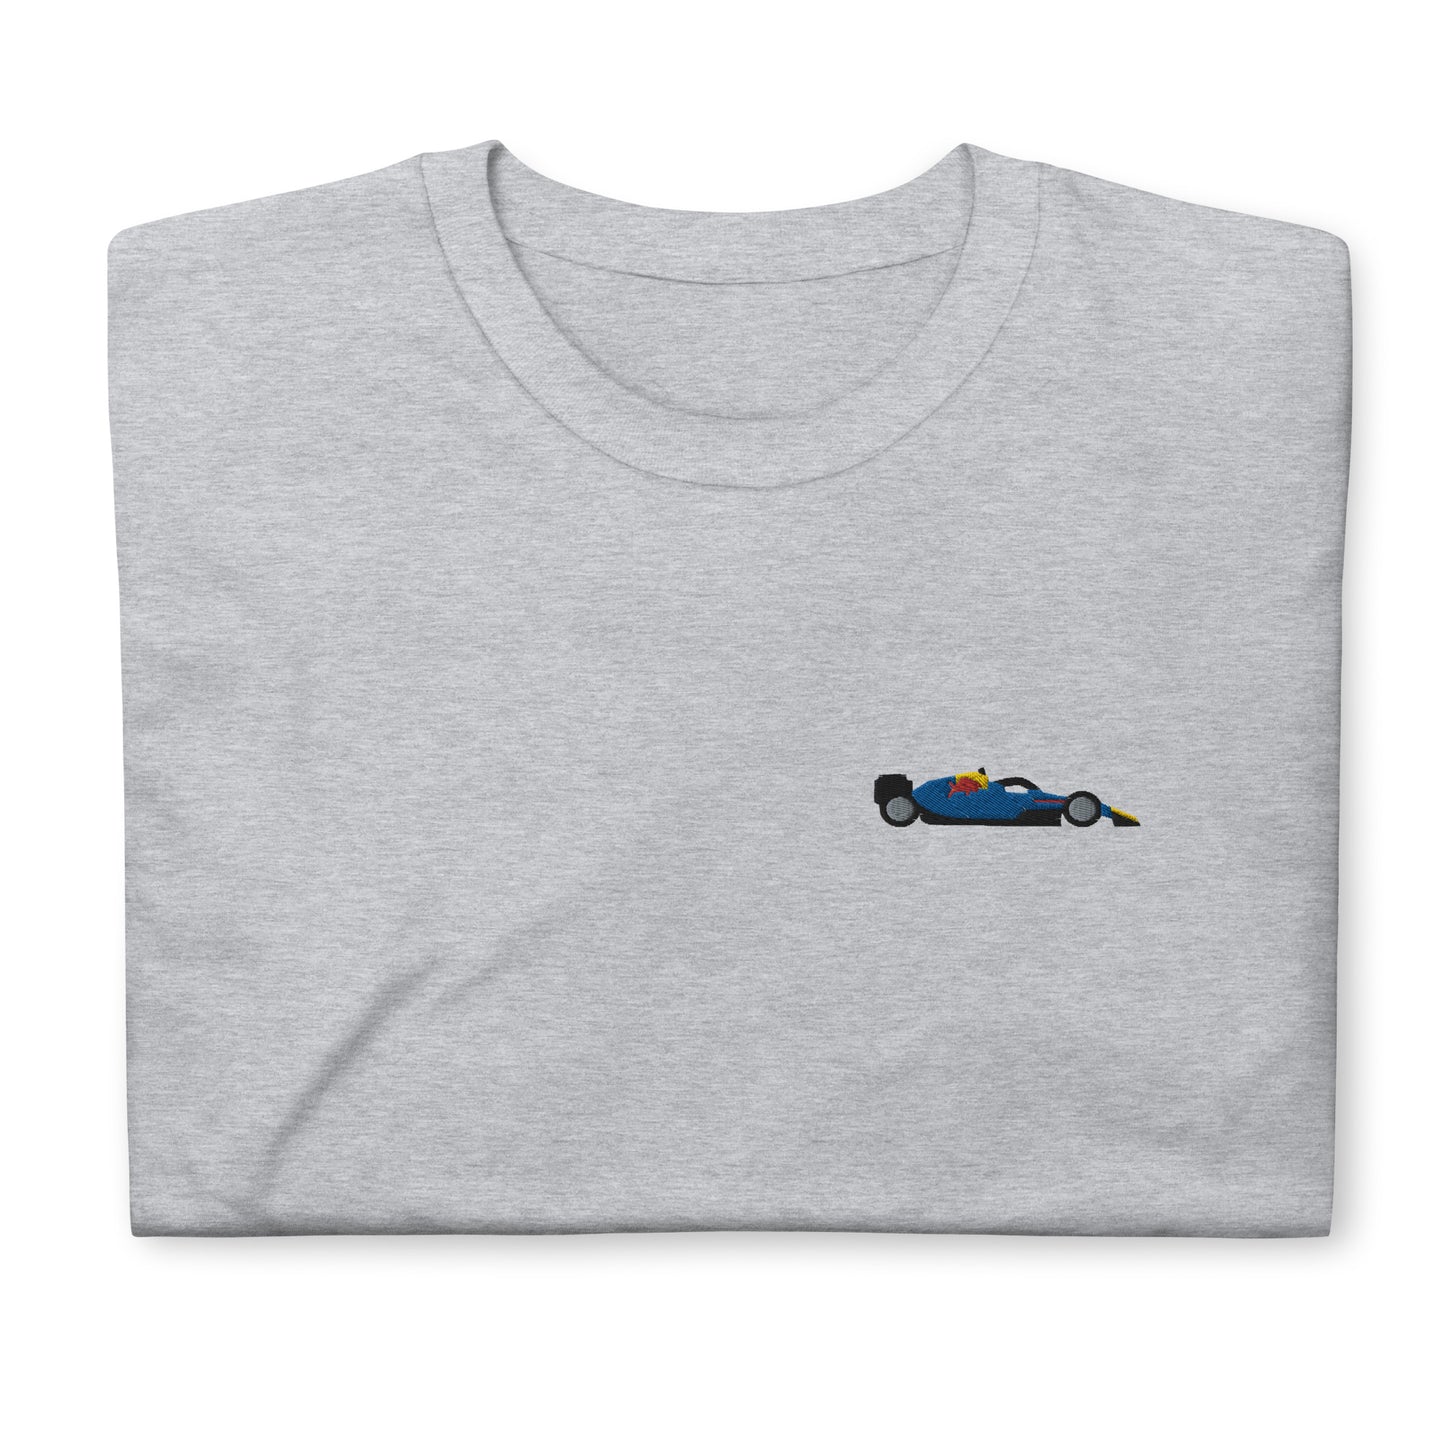 Embroidered Red Bull F1 Car Unisex T-Shirt Grey